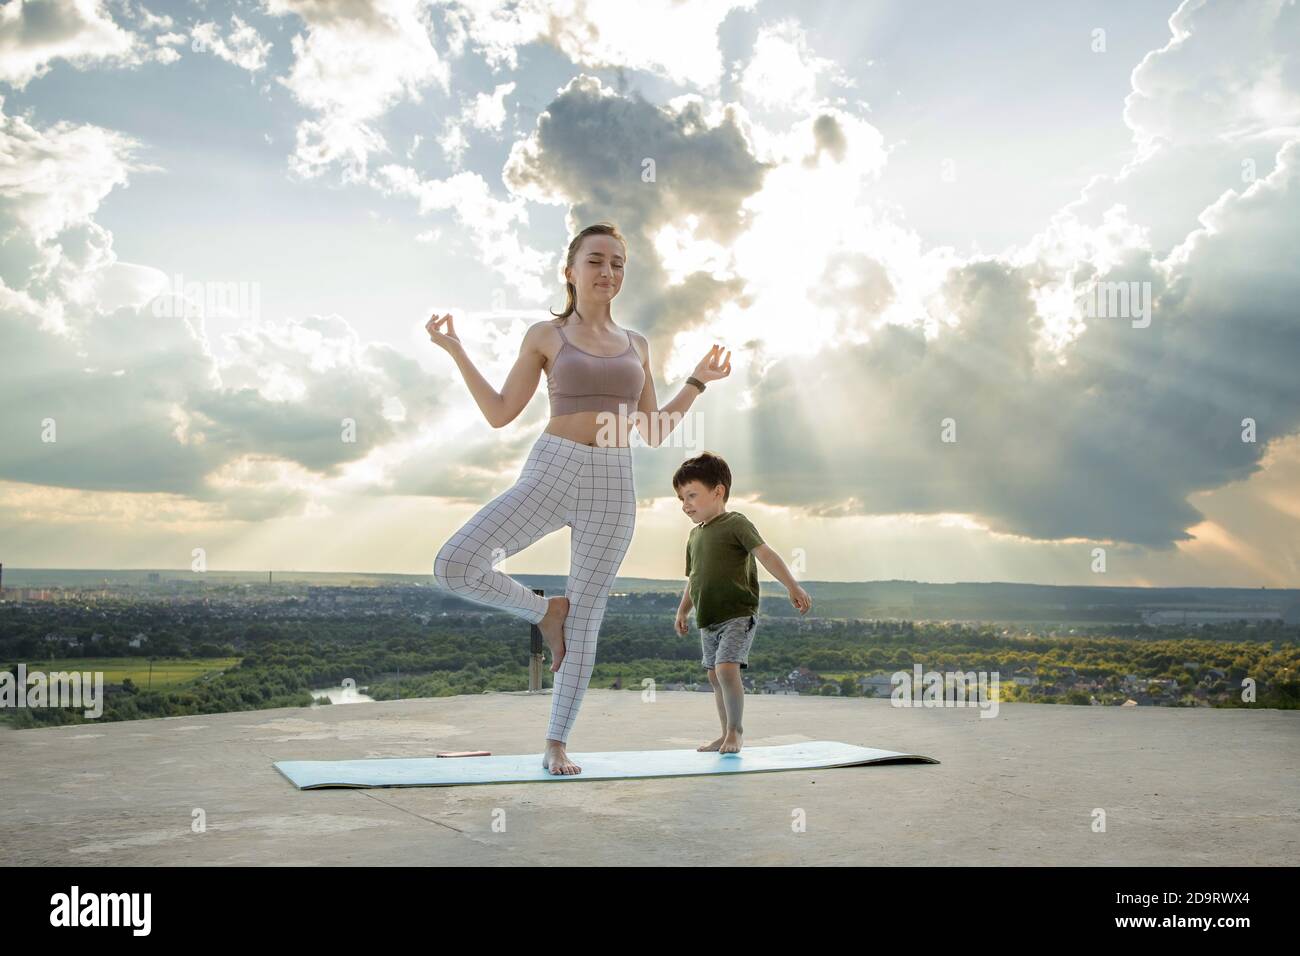 Mother and son doing exercise on the balcony in the background of a city during sunrise or sunset, concept of a healthy lifestyle Stock Photo